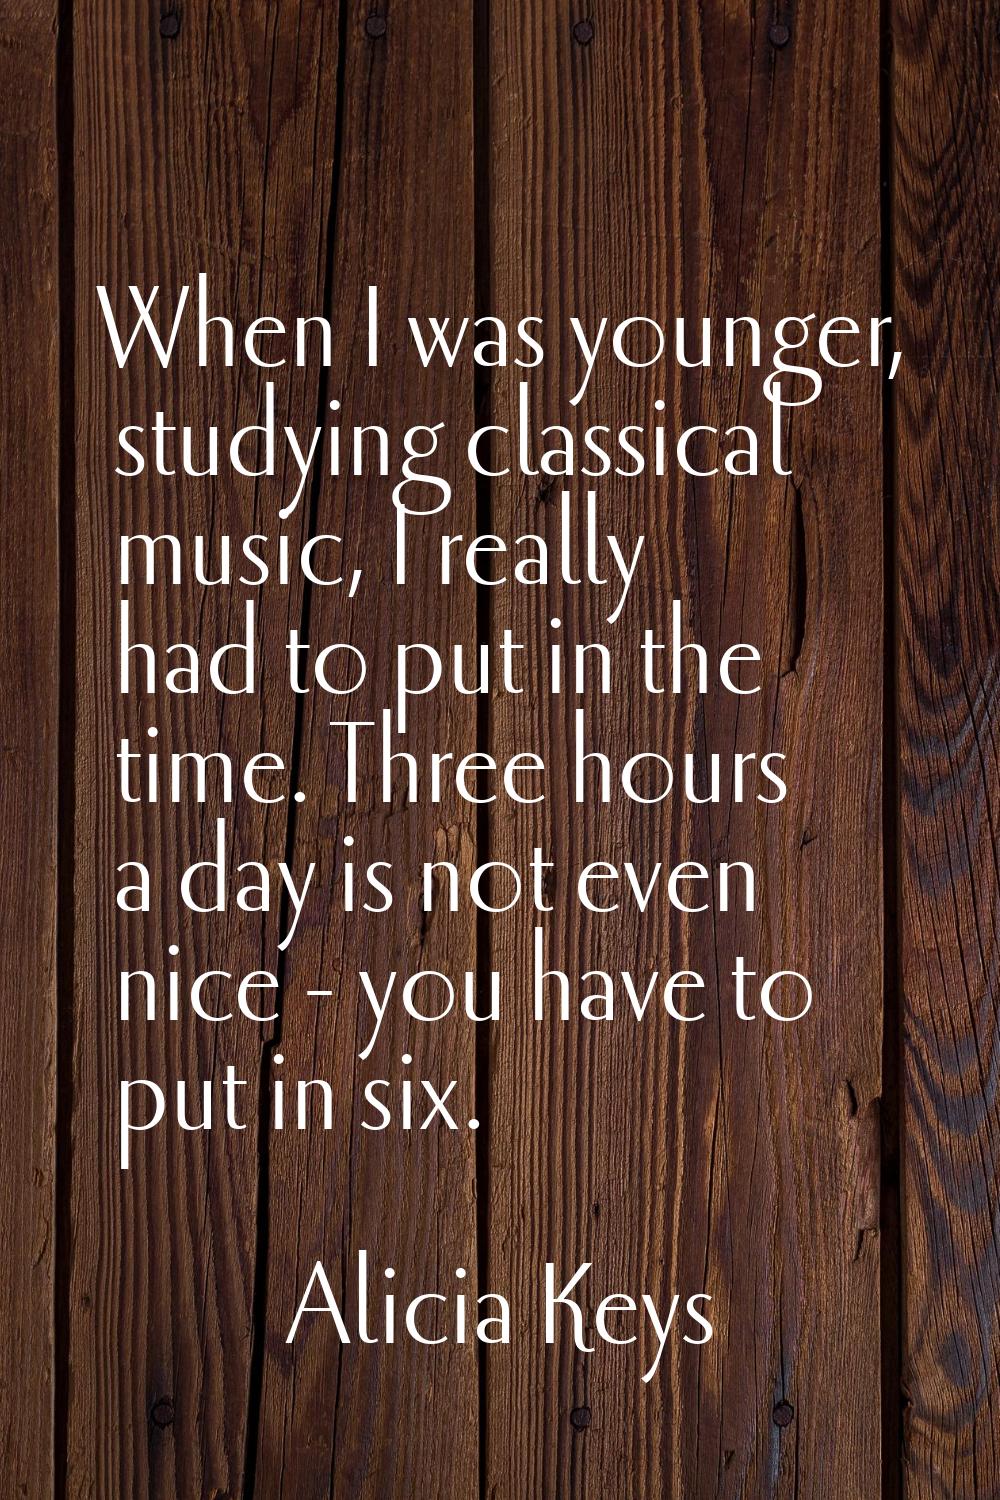 When I was younger, studying classical music, I really had to put in the time. Three hours a day is